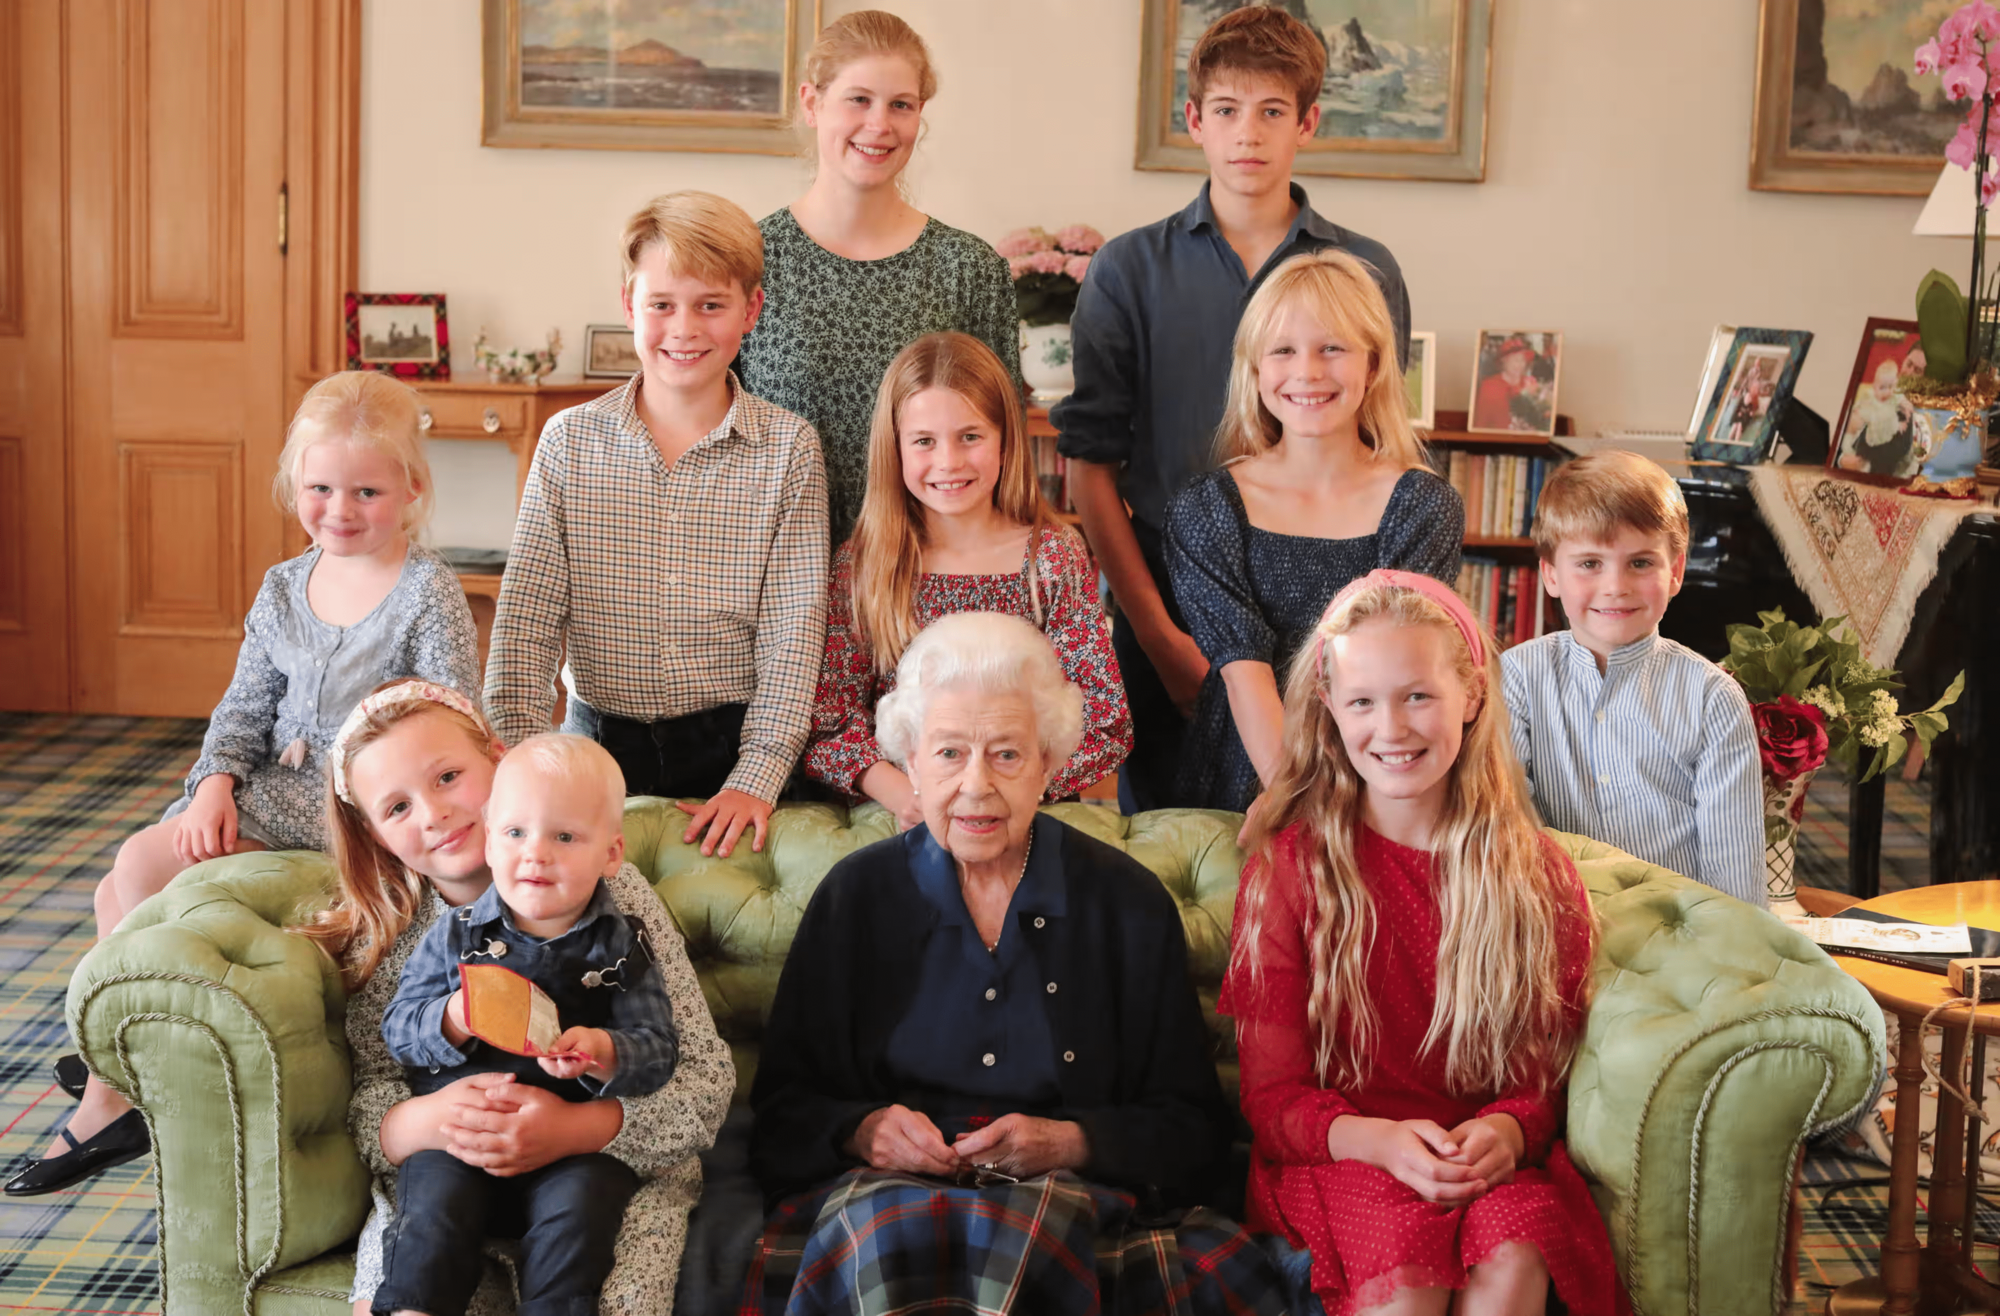 Traces of photoshop were also found on the portrait of the late Elizabeth II with children and grandchildren